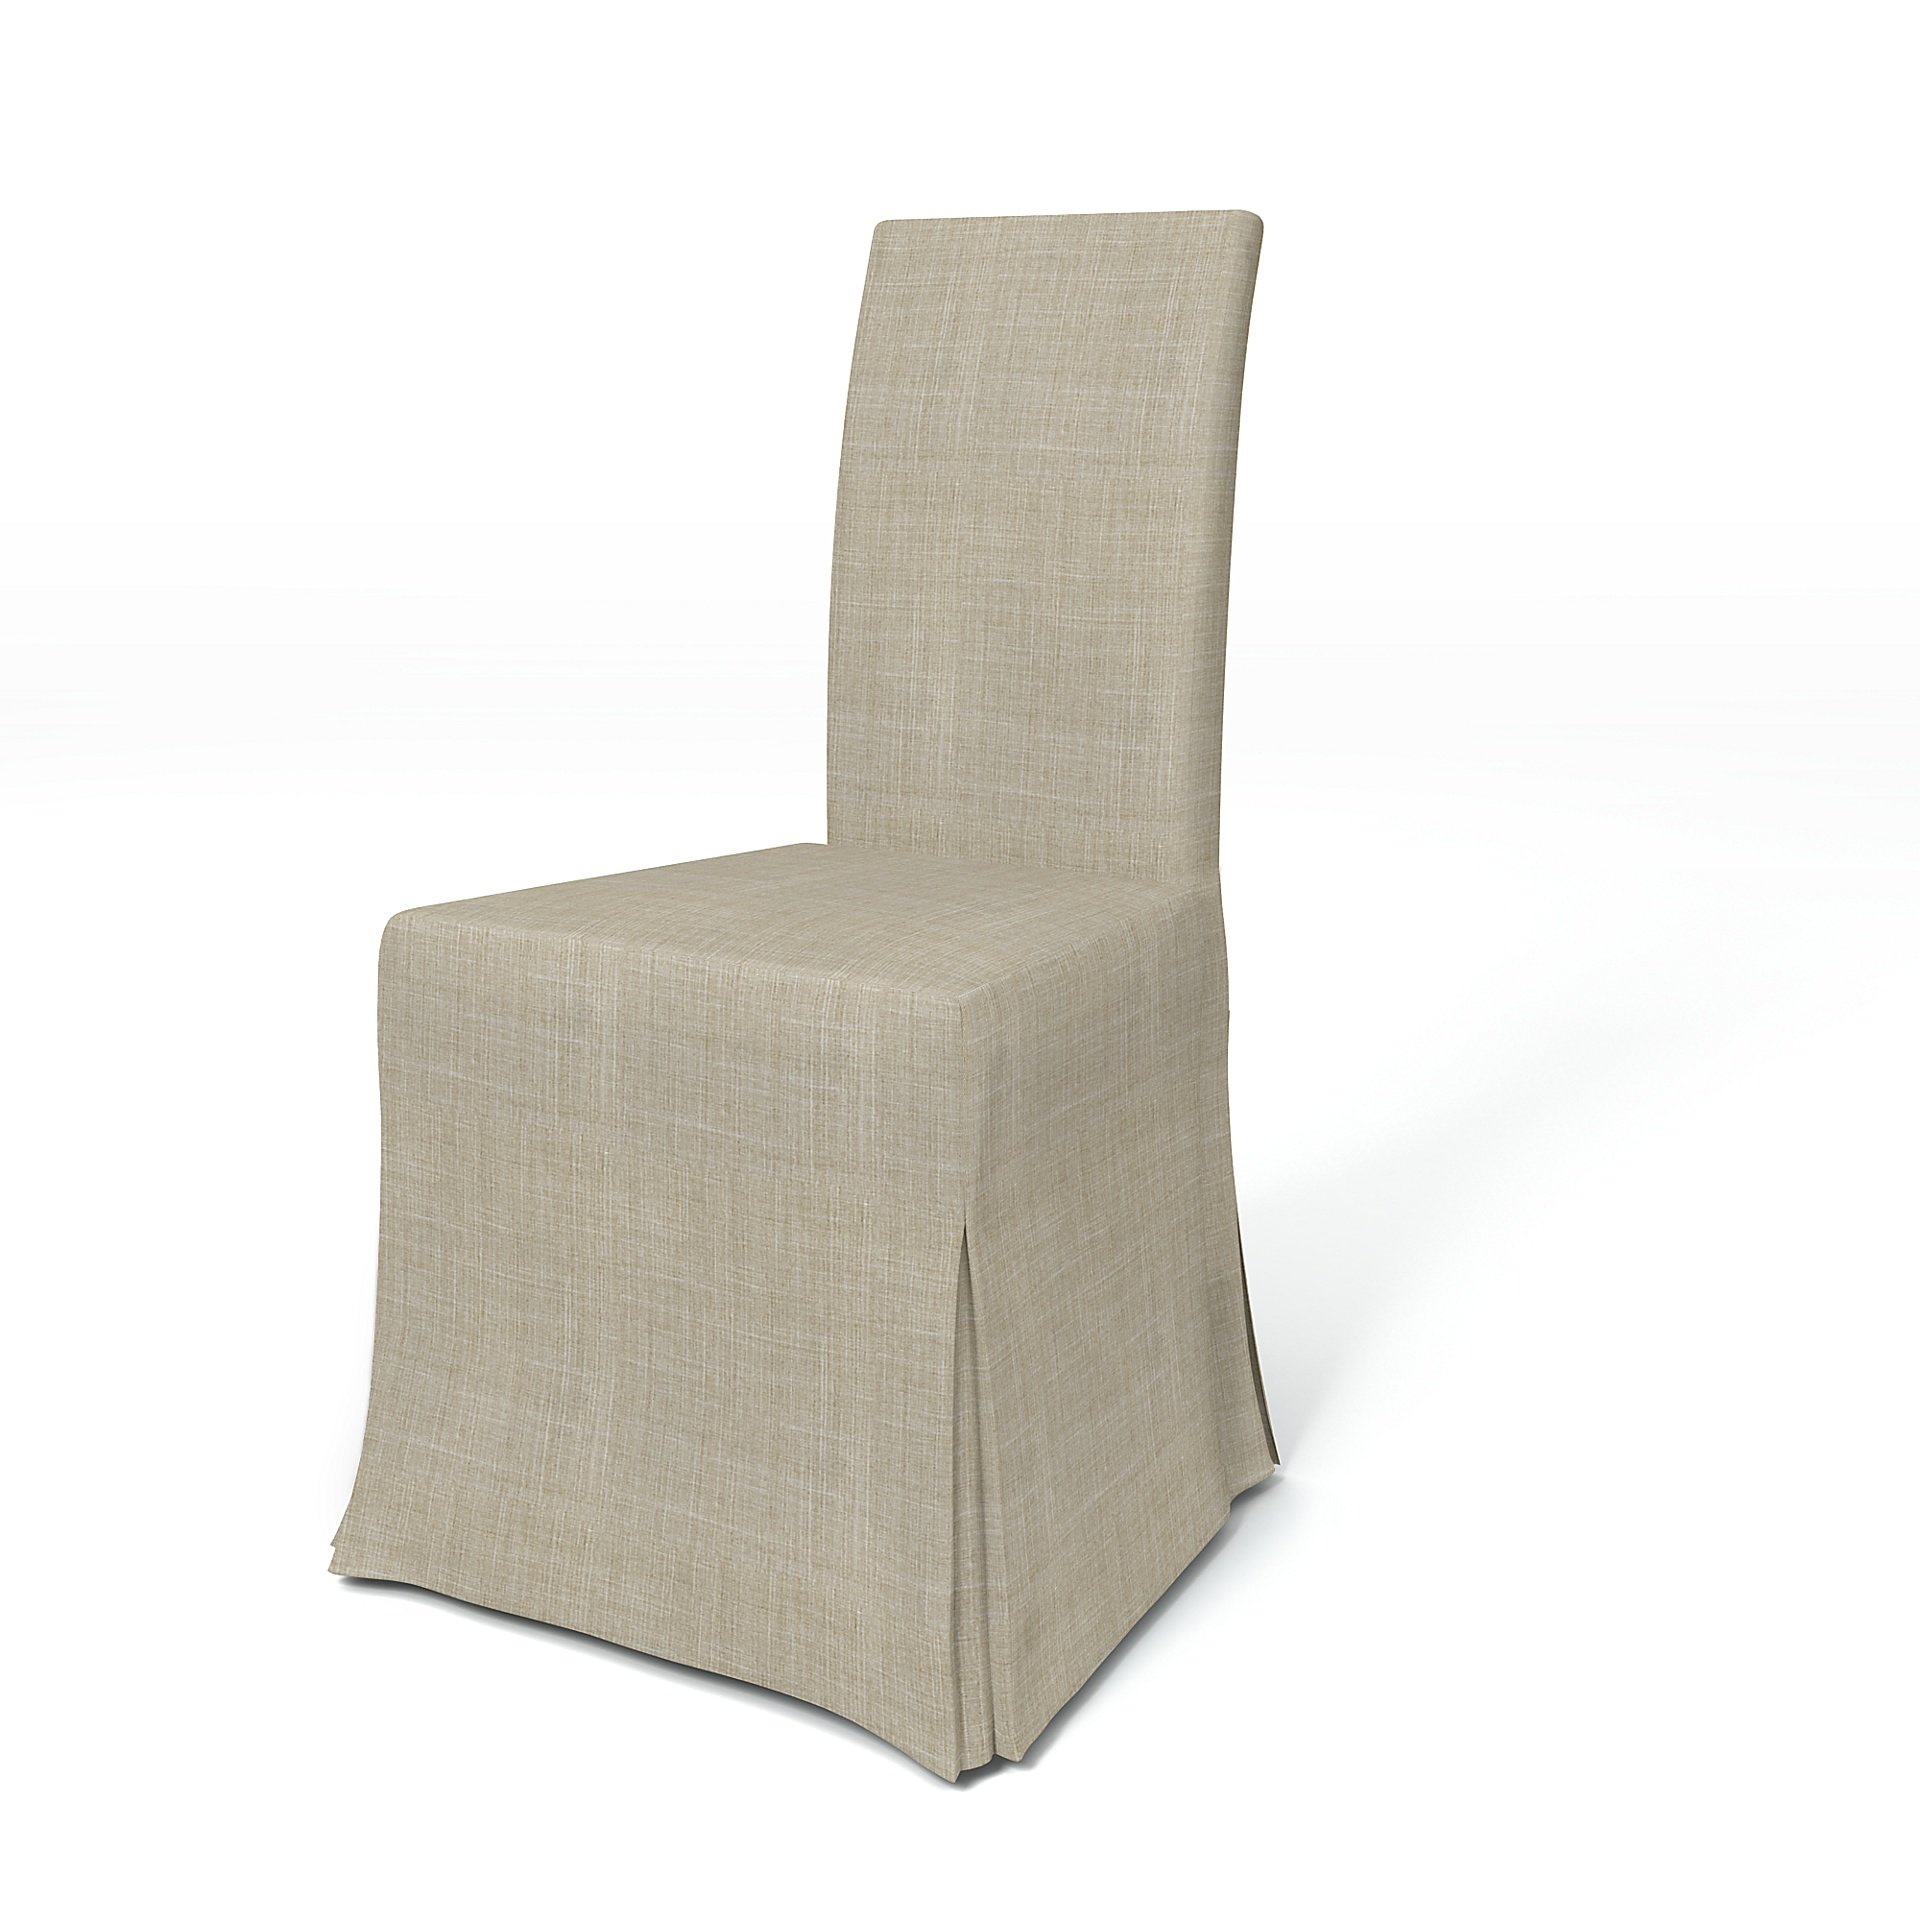 IKEA - Harry Dining Chair Cover, Sand Beige, Boucle & Texture - Bemz